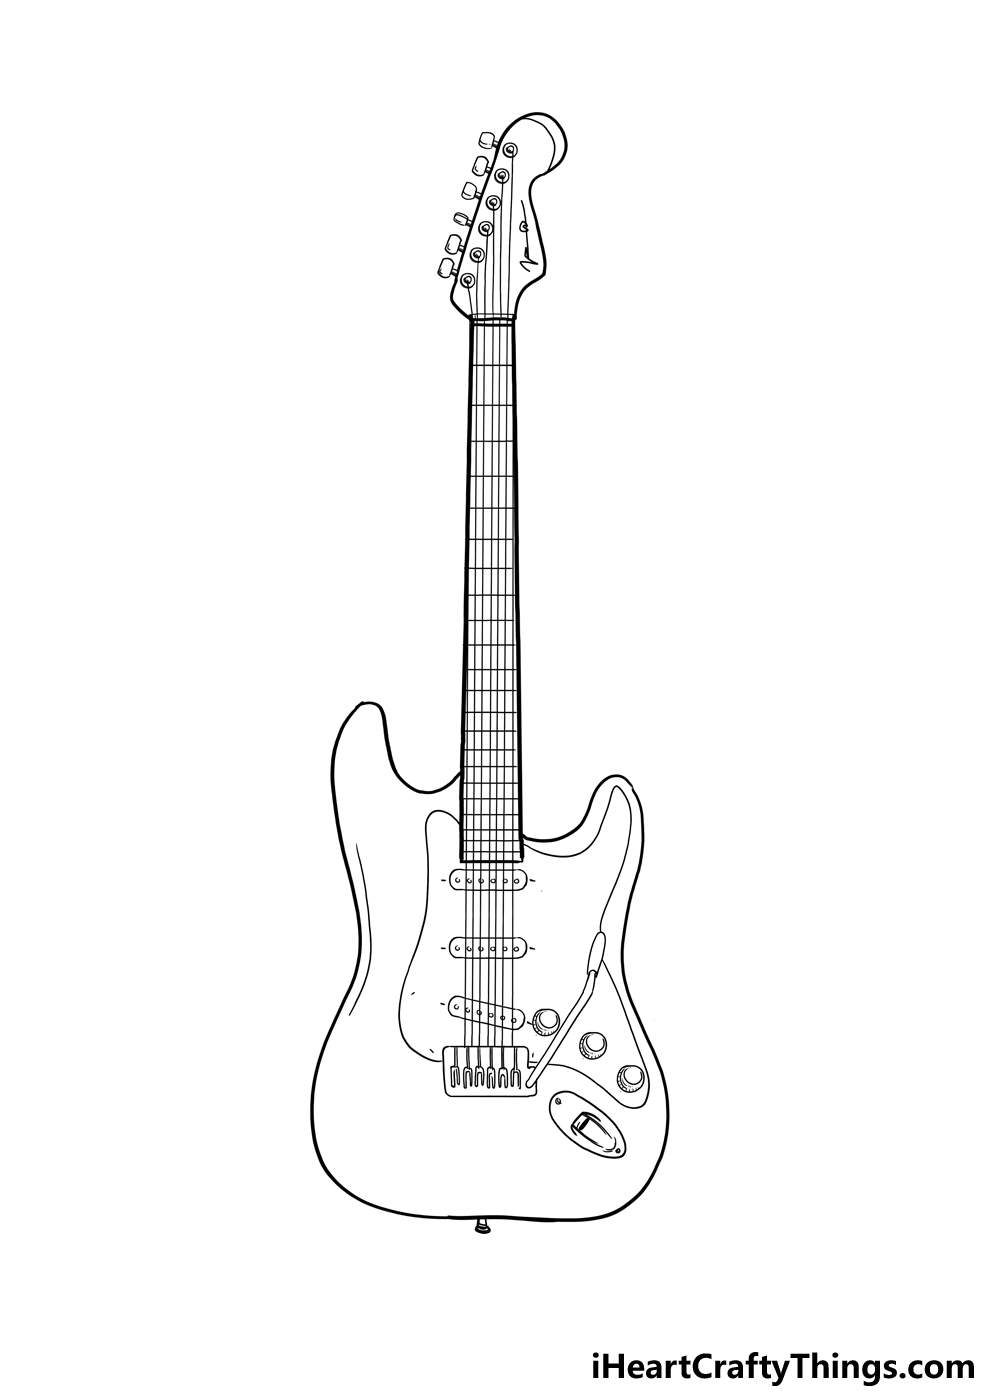 How to Draw An Electric Guitar step 5